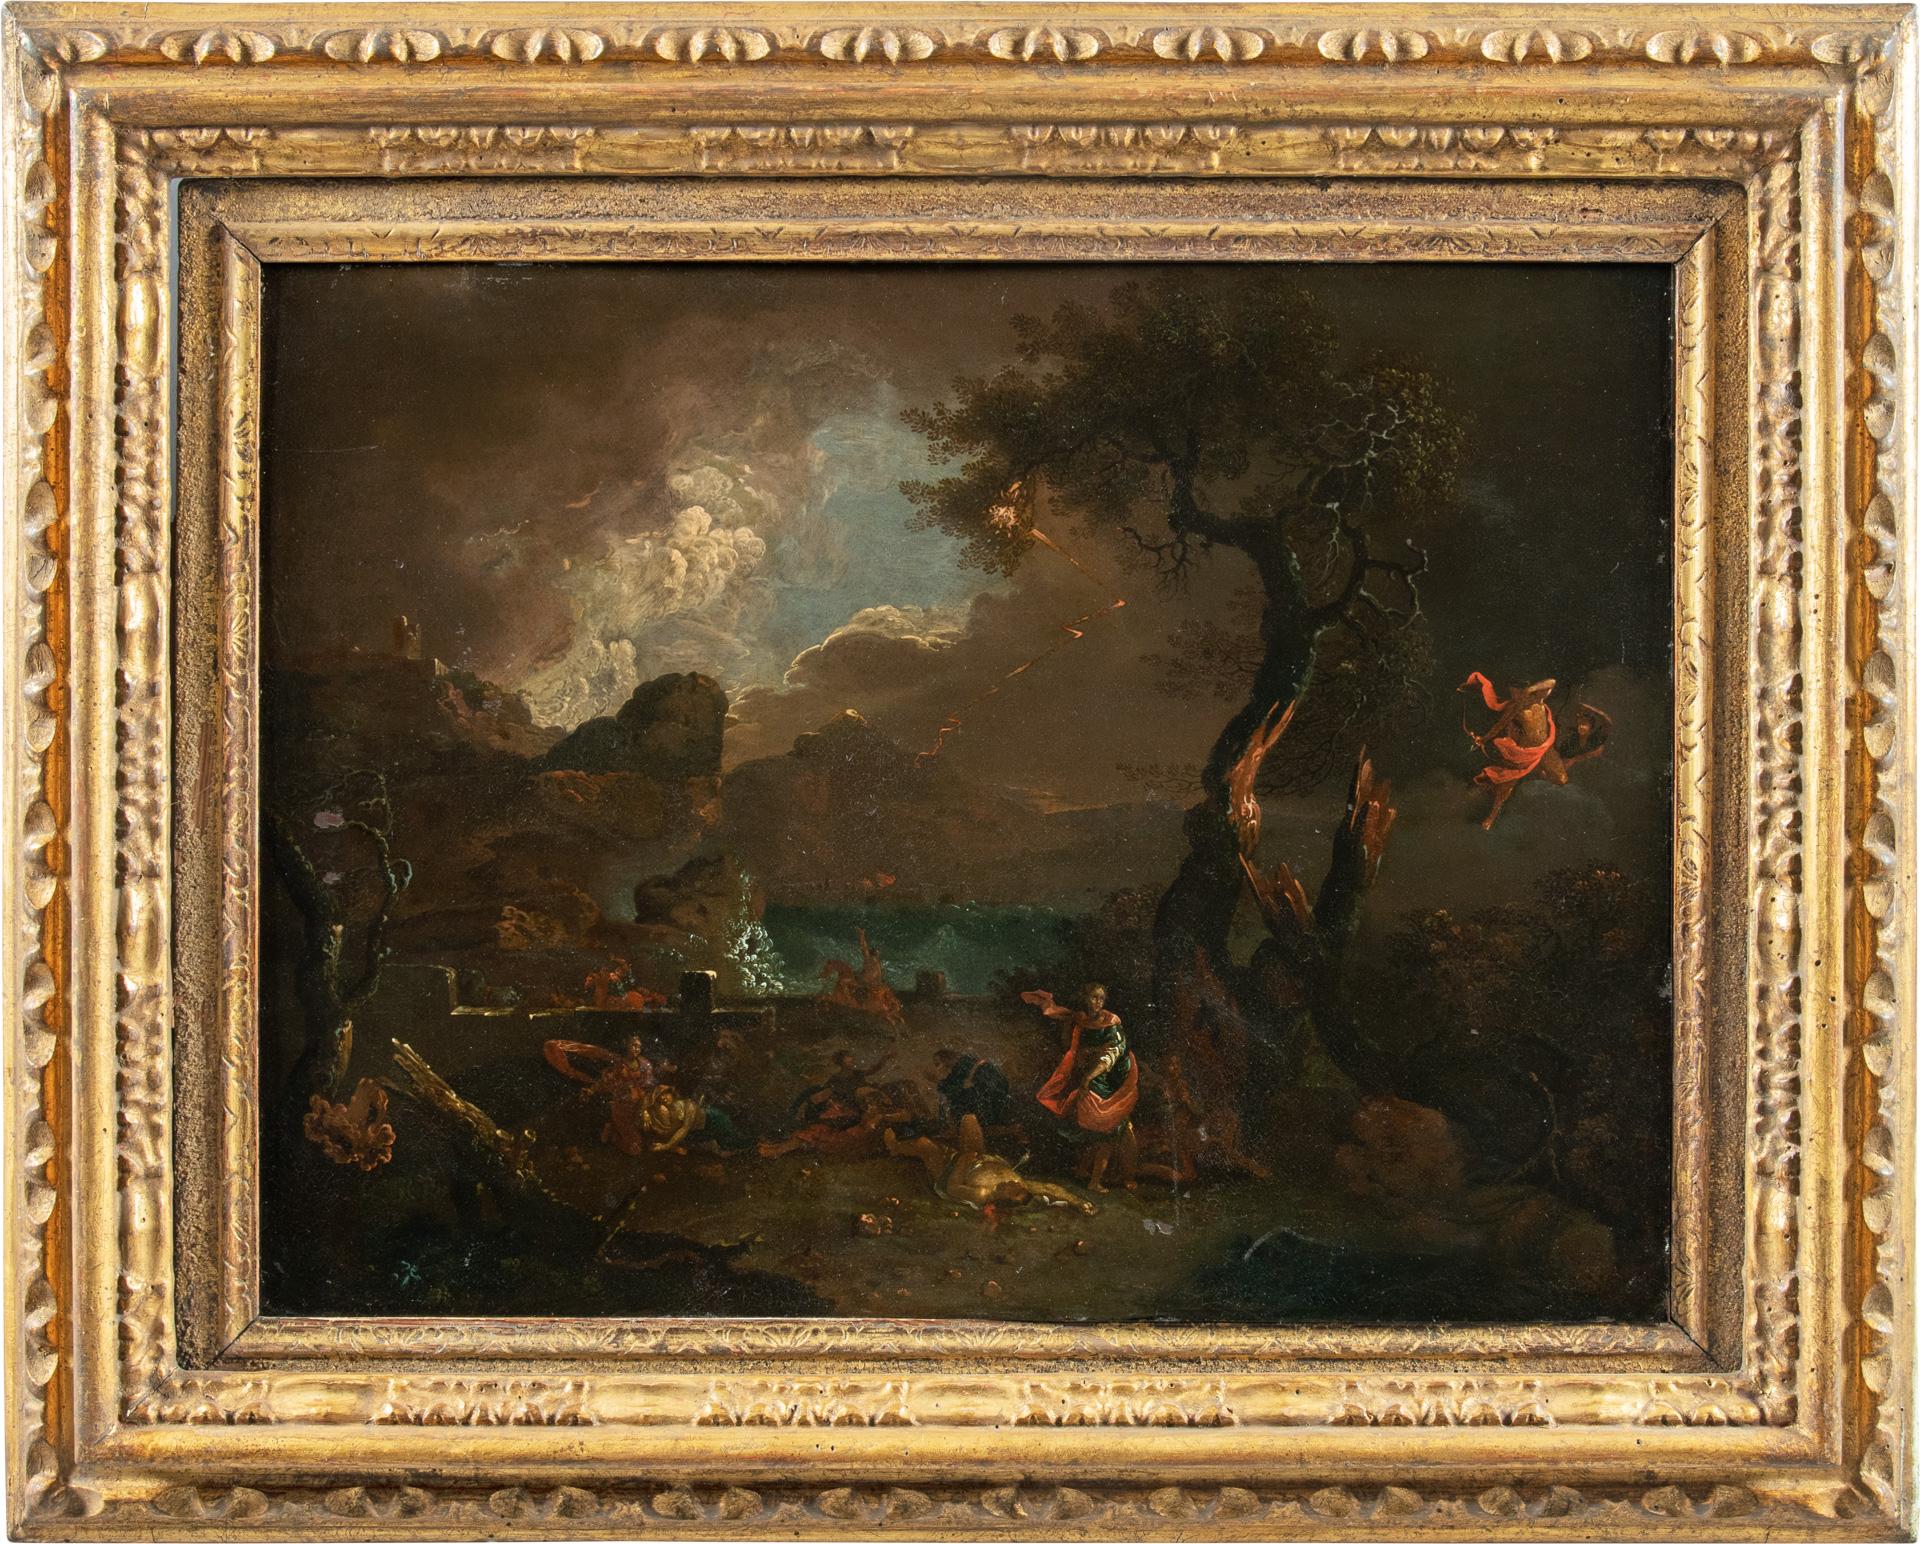 Unknown Landscape Painting - 17th century Italian figure painting - Fall of Fetonte - Oil on copper Landscape